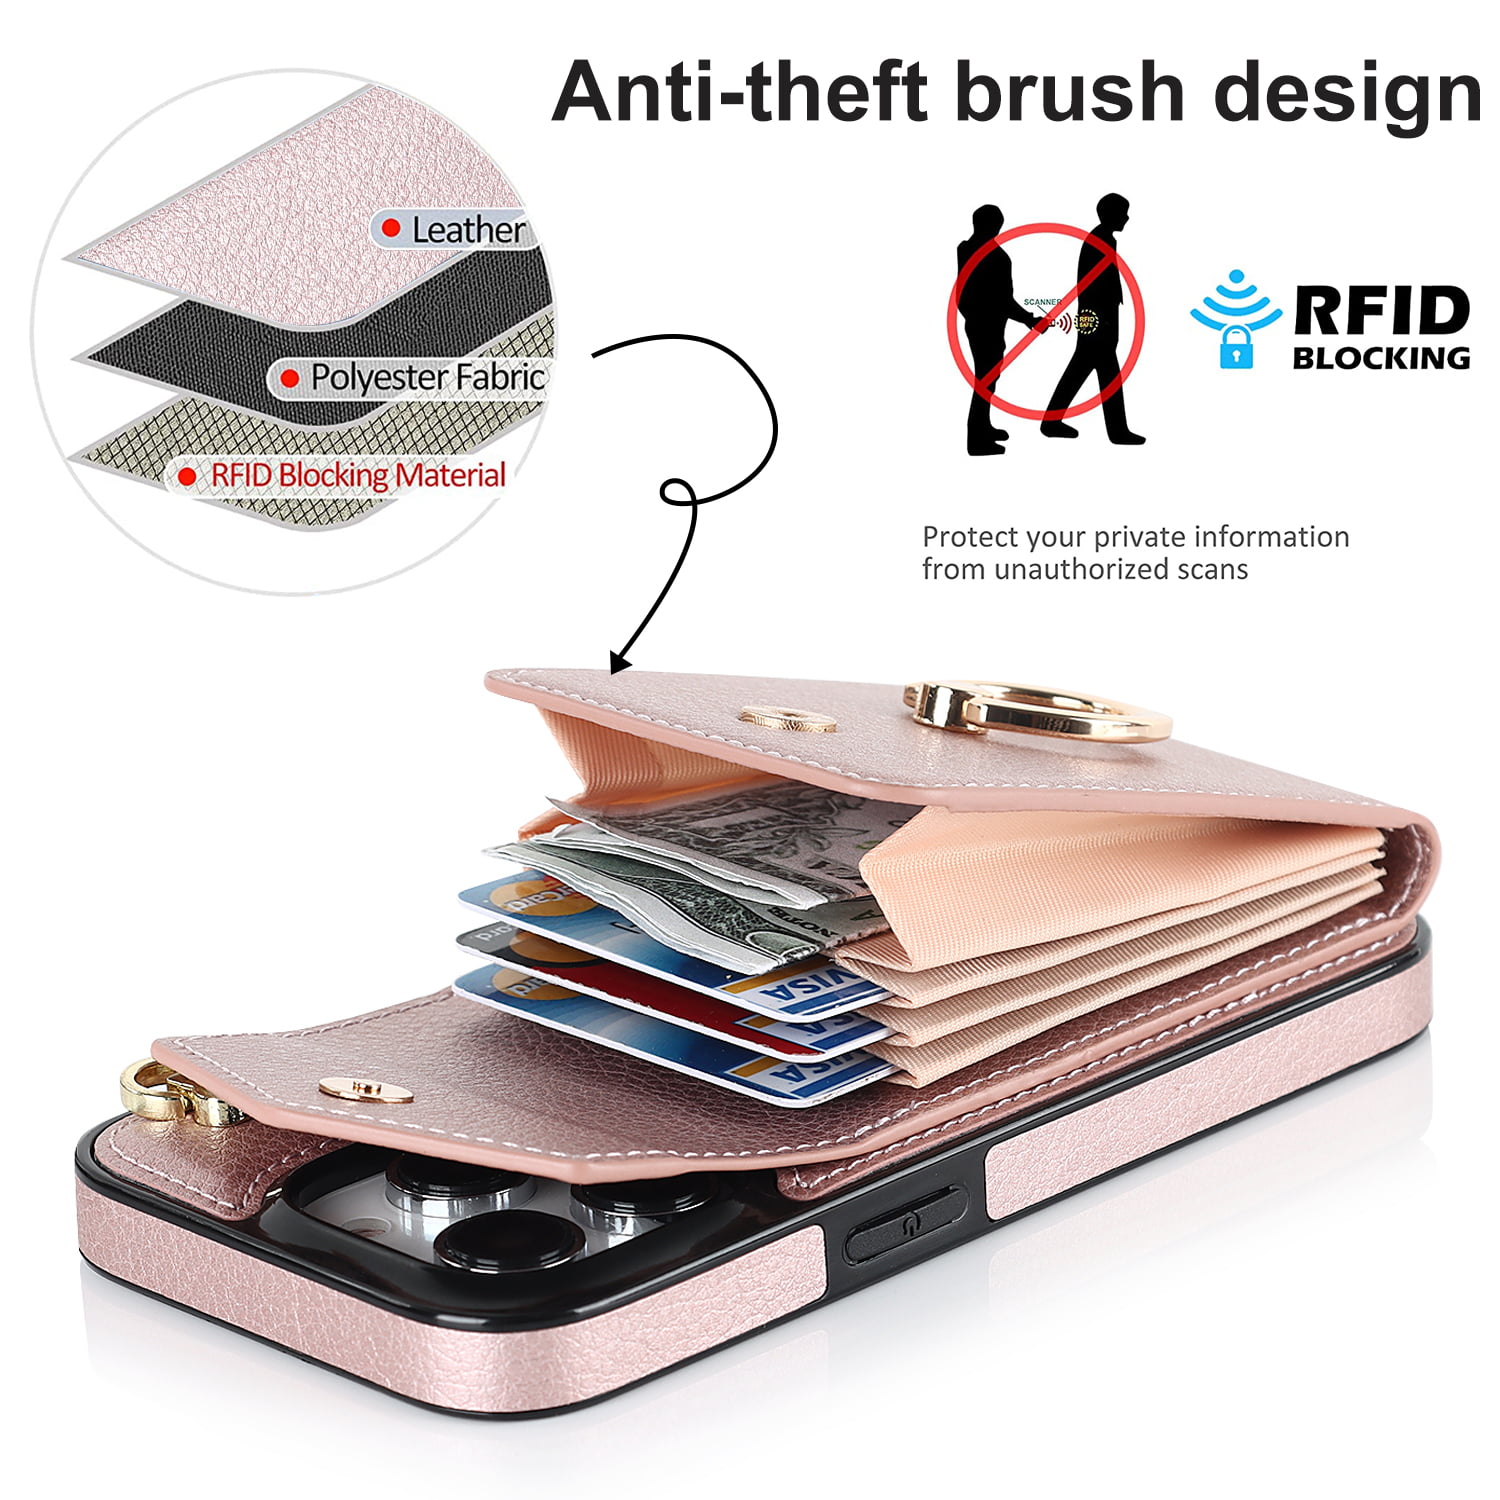 PAYERU Wallet Case Compatible with iPhone 14 Pro Max, Cute Light Luxury Bag Design, Purse Flip Card Pouch Cover Case with Handstrap Long Shoulder